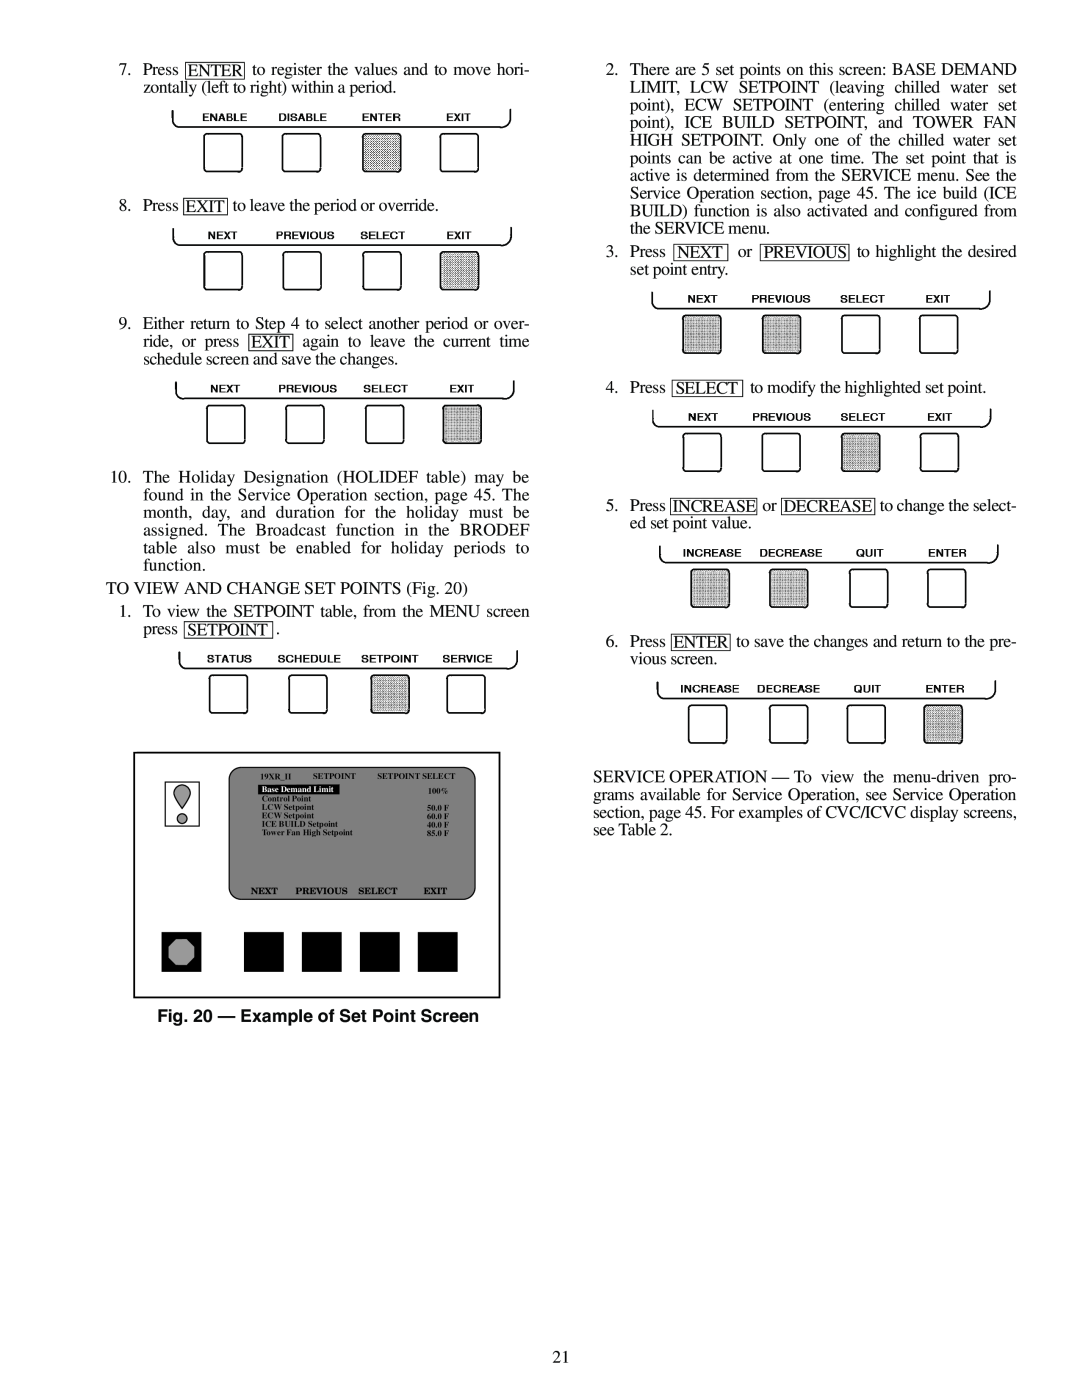 Carrier XRV, 19XR specifications Example of Set Point Screen 